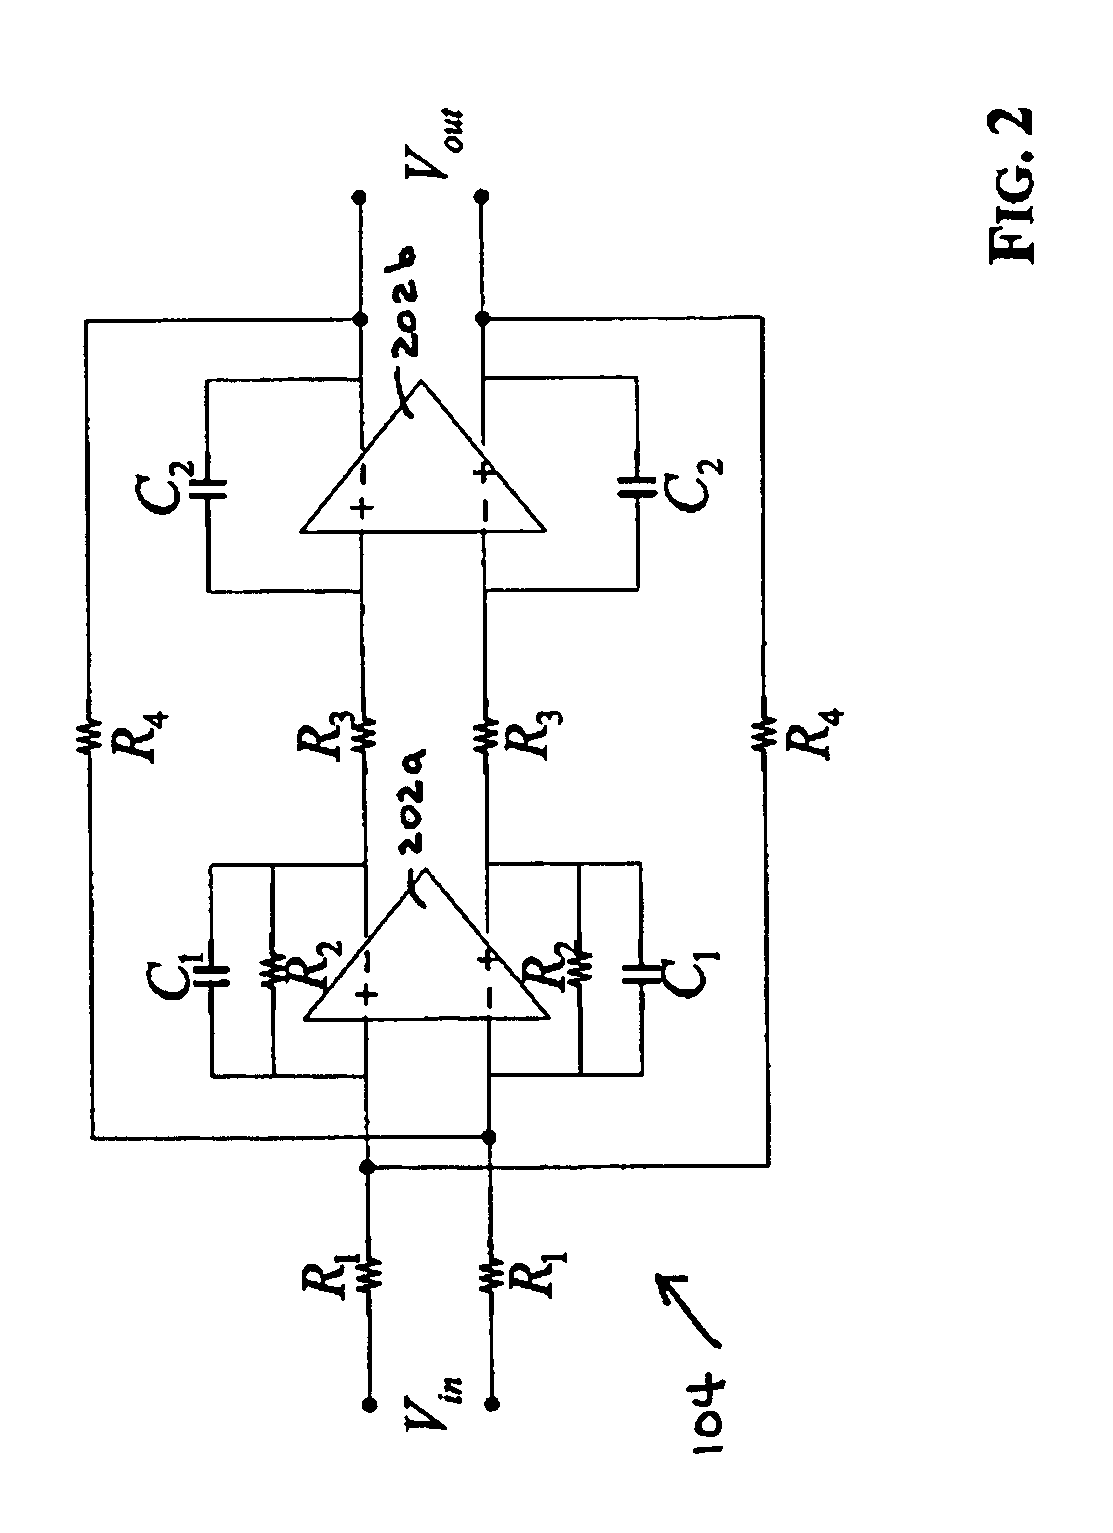 Active-RC filter with compensation to reduce Q enhancement